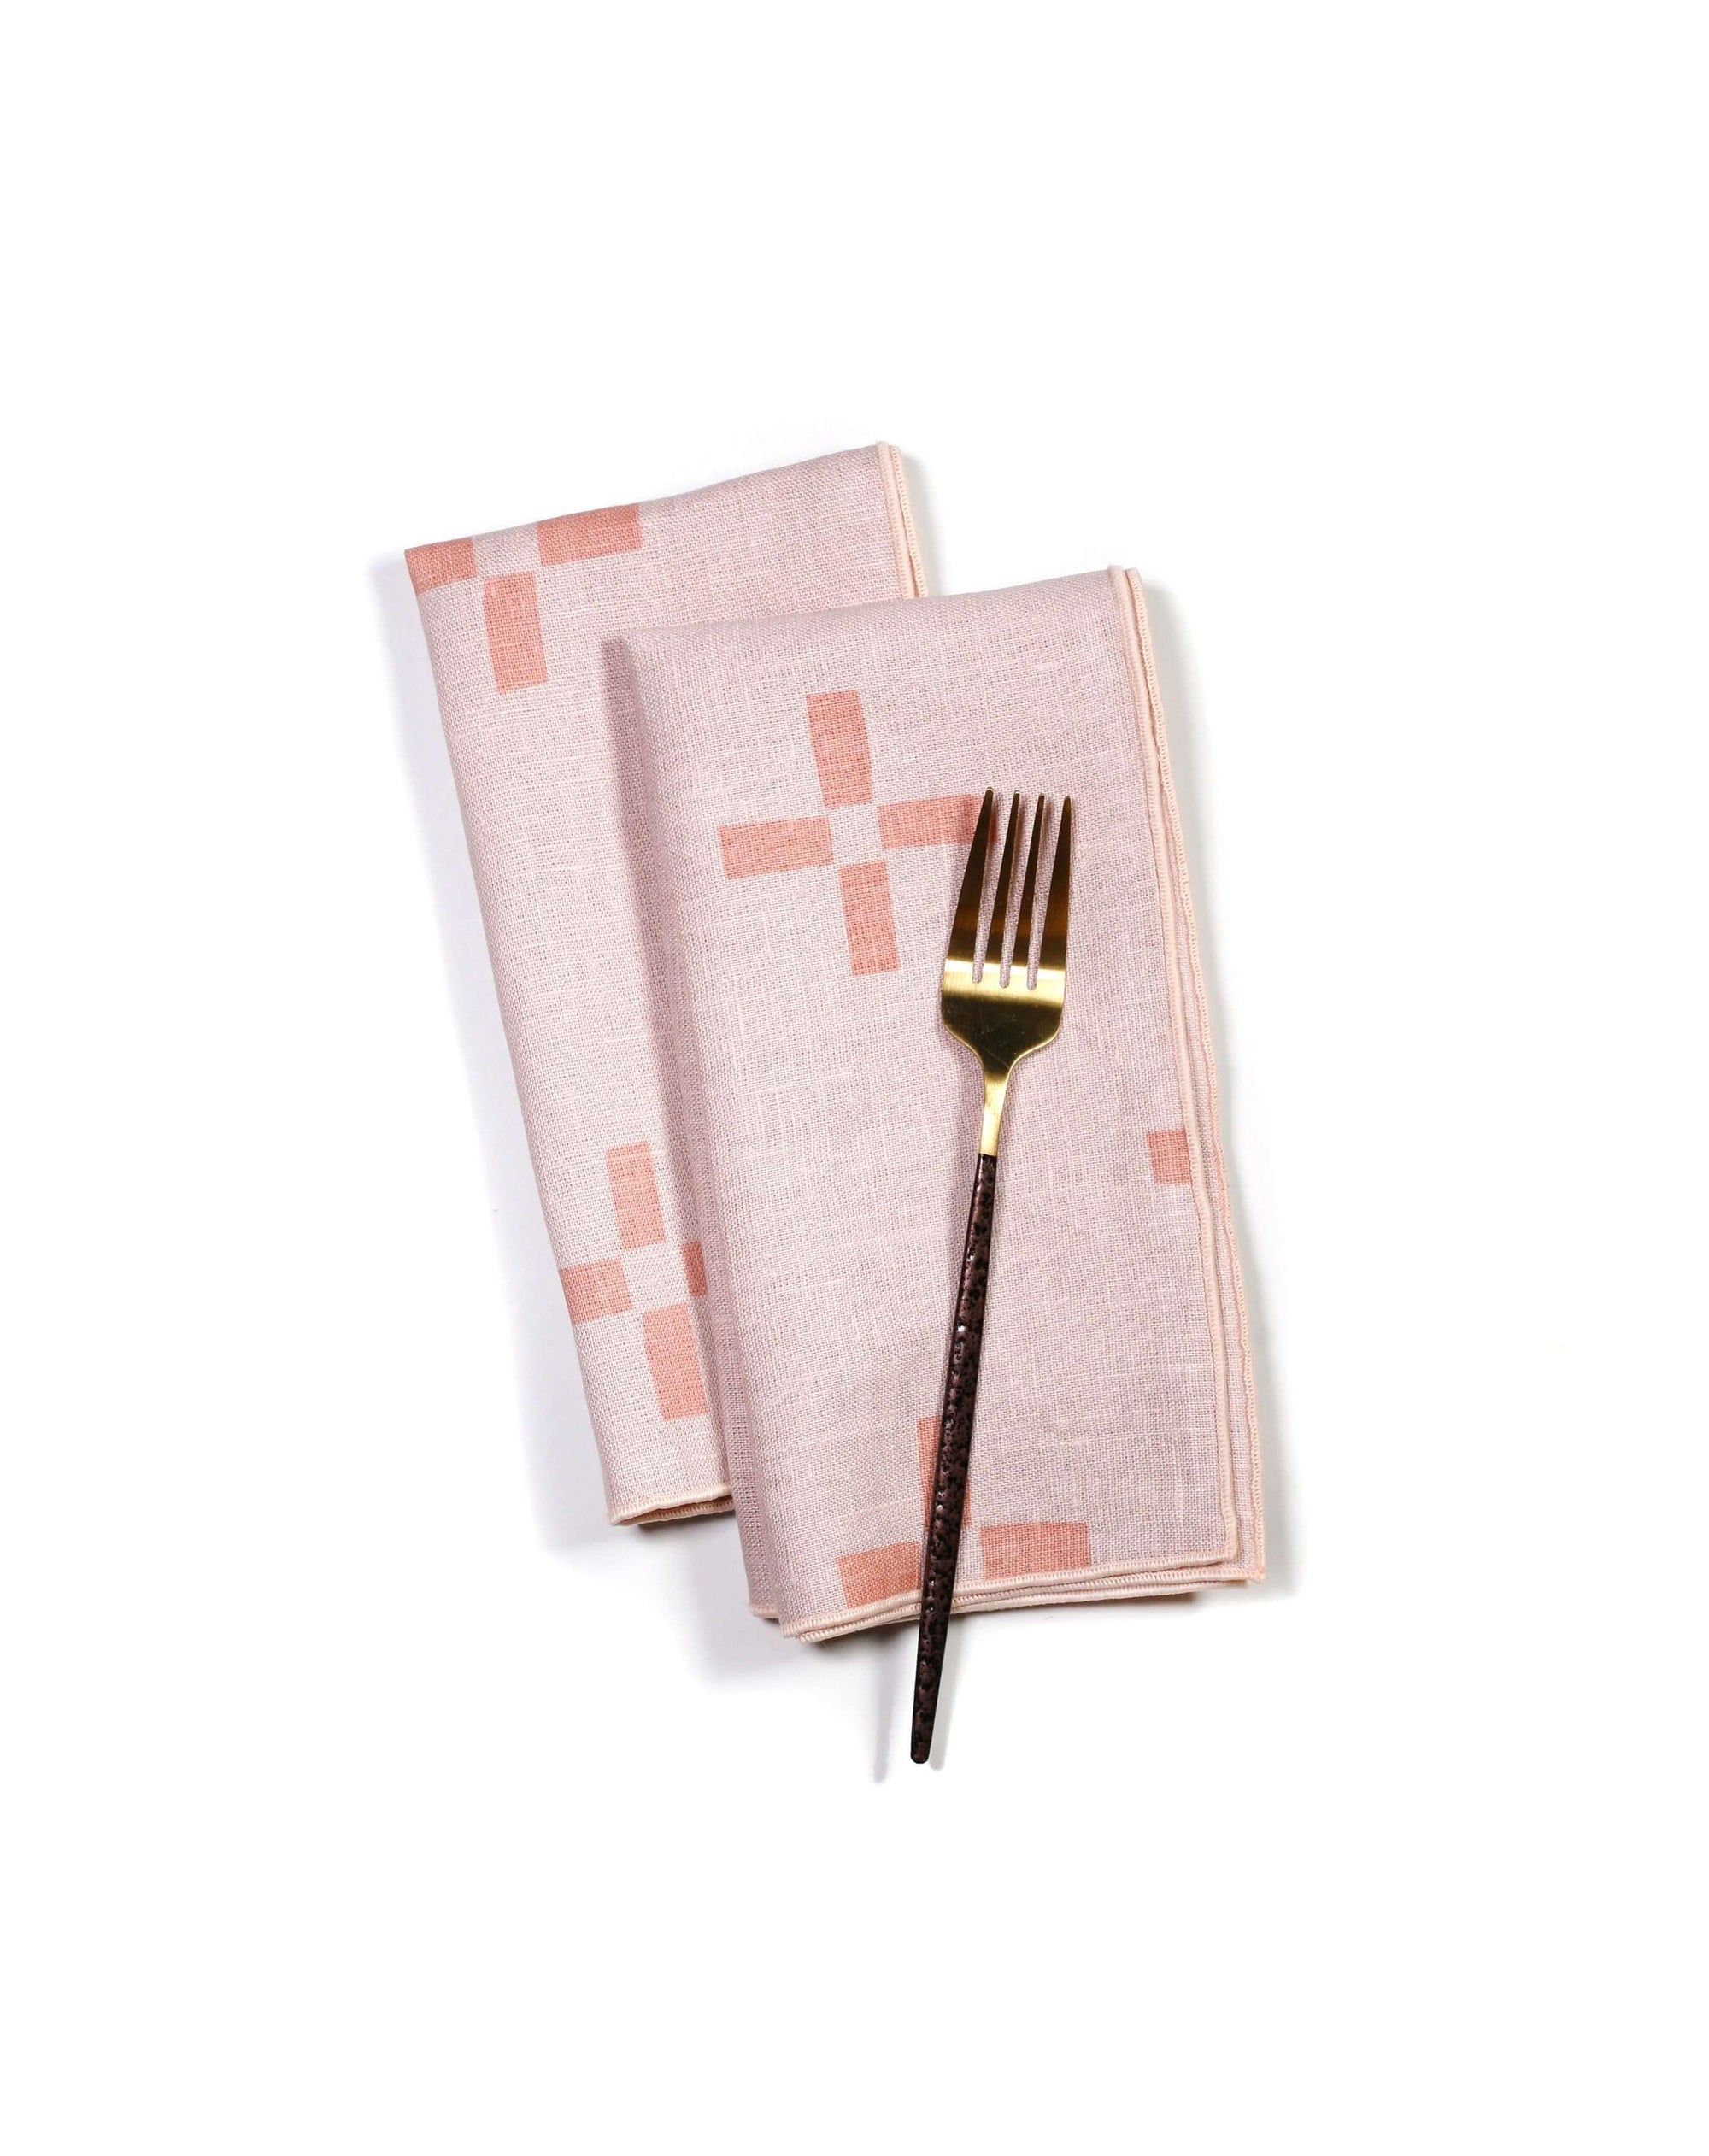 'Plus 2' Hand-Printed Dinner Napkins in Melon Rose, Set of 2